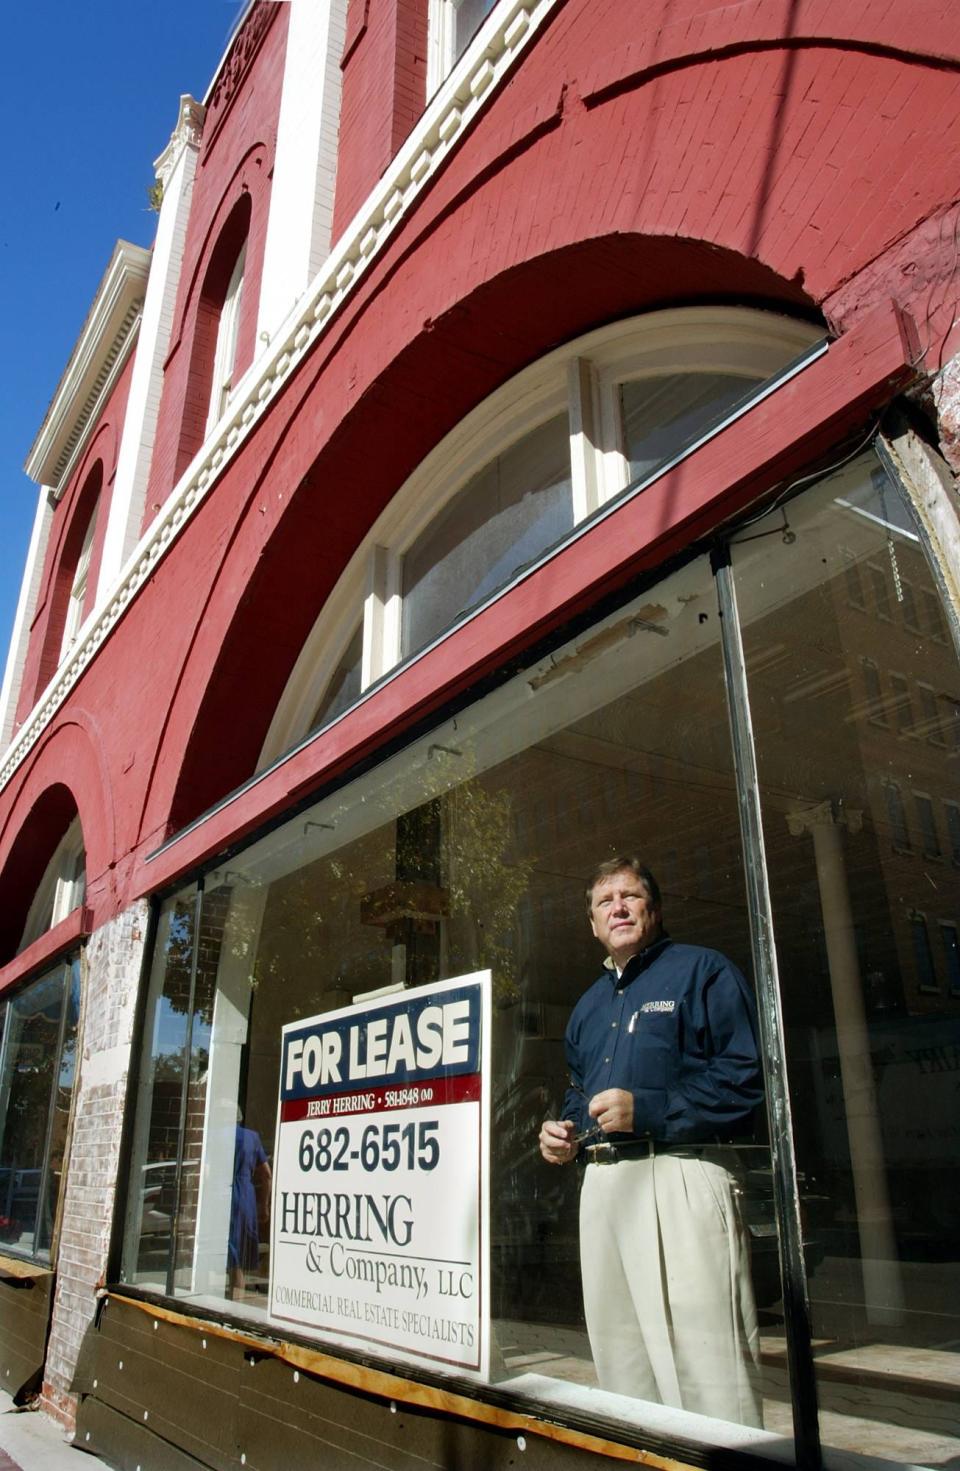 Jerry Herring, President of Herring & Company, LLC, looks out the first floor of the Clonts Building in downtown Lakeland in 2002.He had recently purchased the building, built in 1903, with plans to renovate it for retail and office space. Herring, who bought and renovated many properties downtown, died recently at age 75.